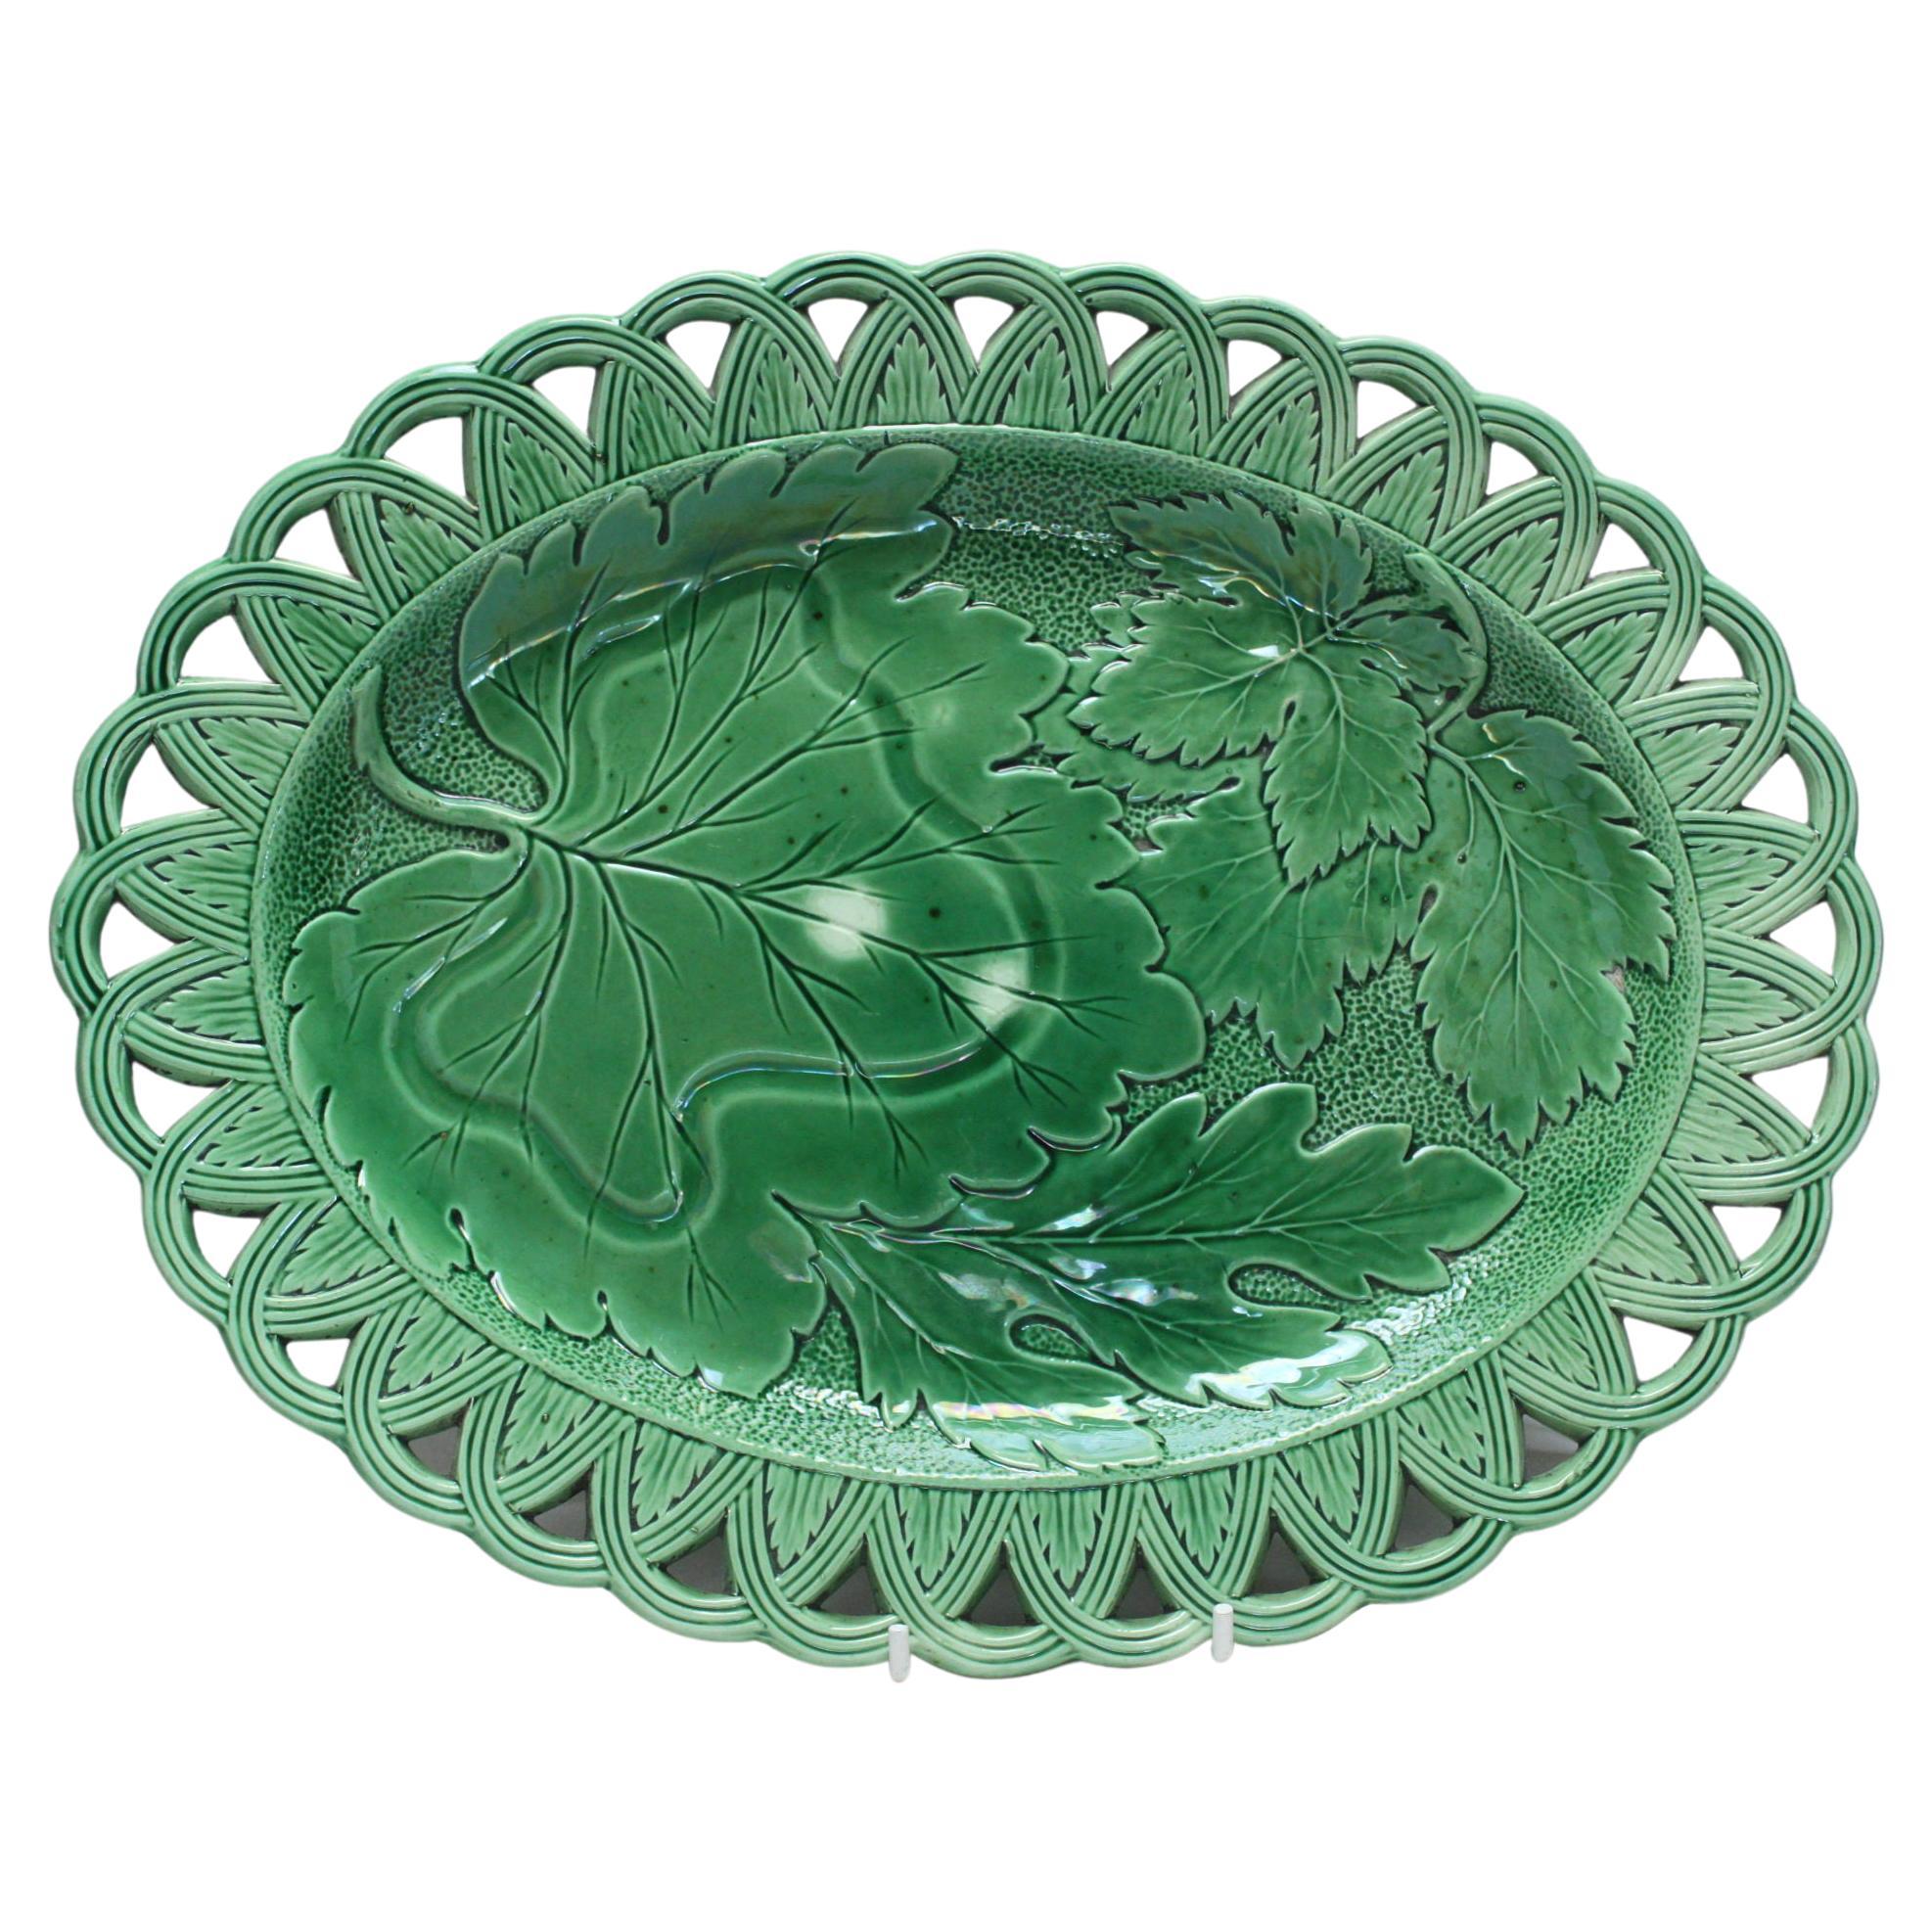 Oval Majolica Plate with Reticulated Rim